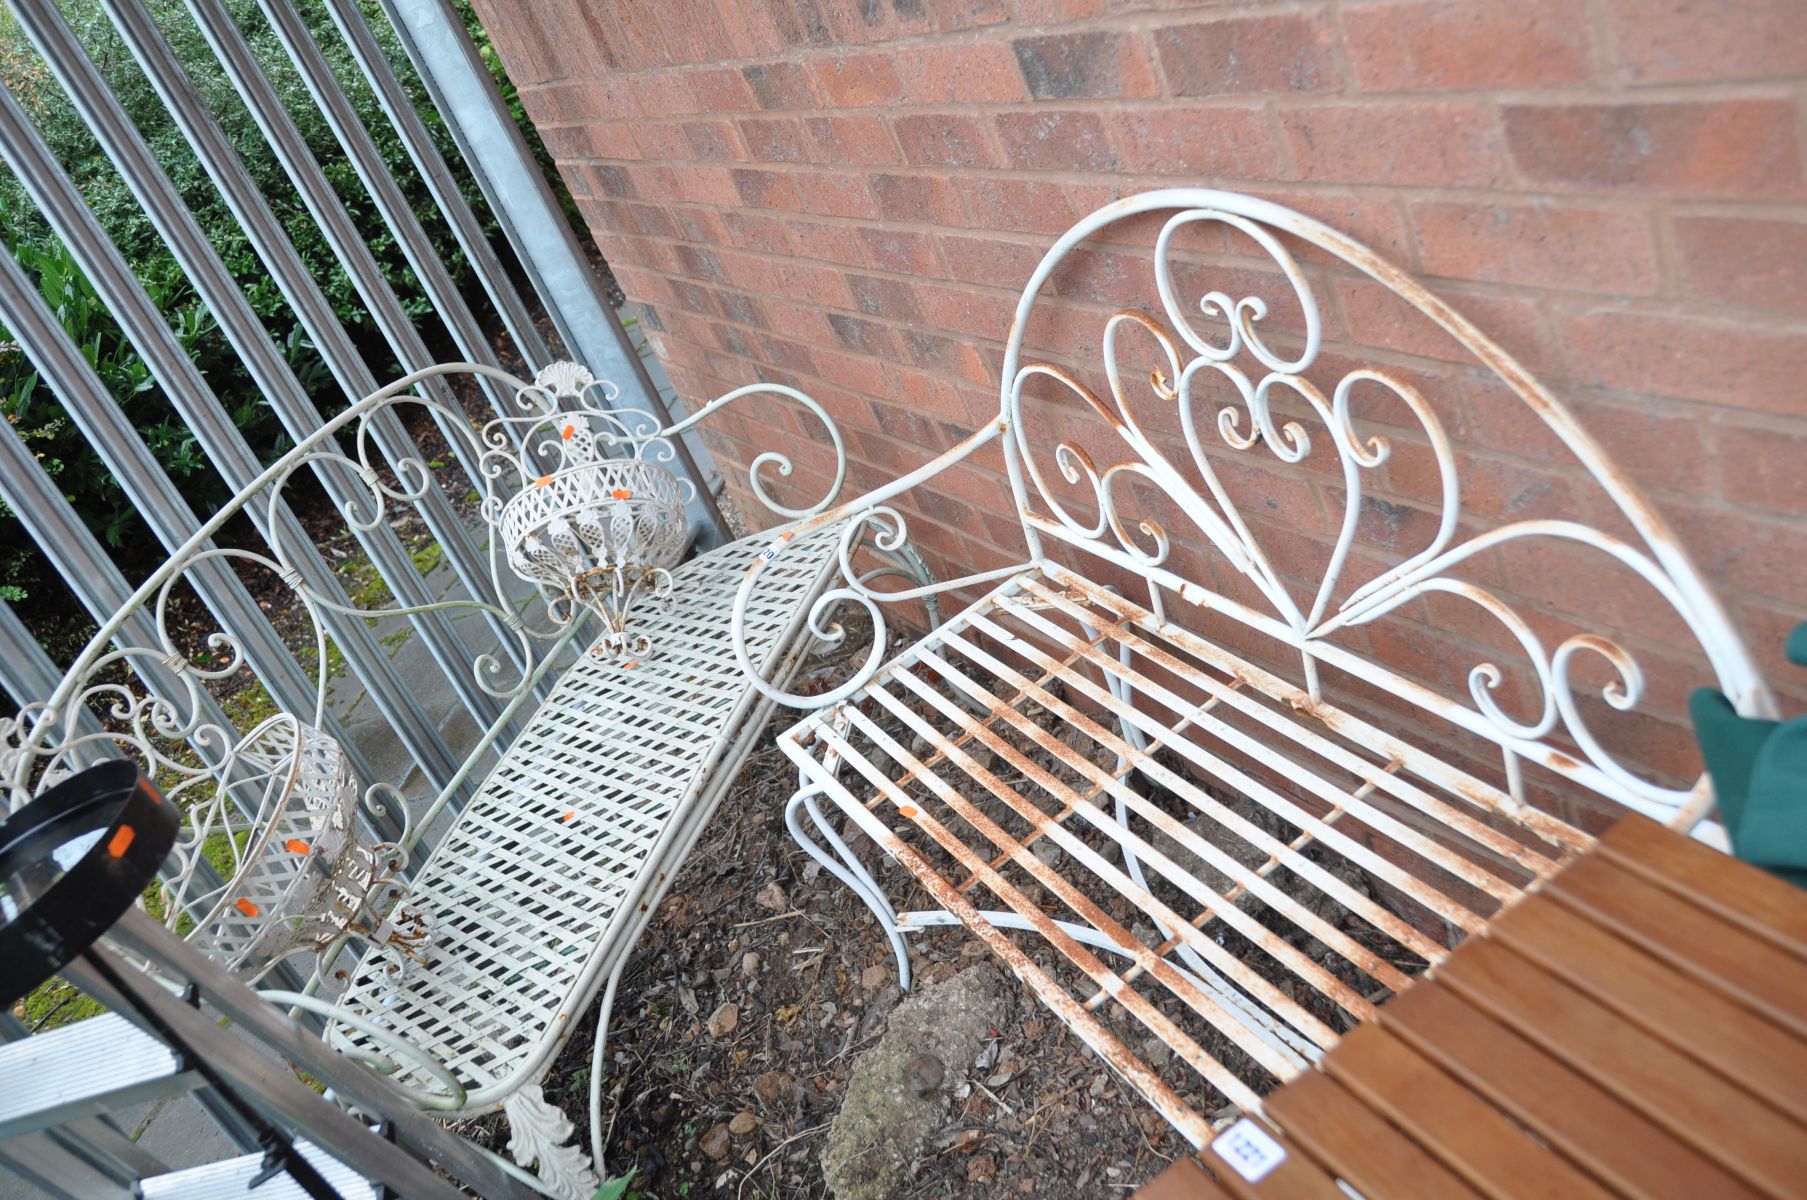 TWO ORNATE METAL MODERN GARDEN BENCHES both with scrolled detailing one 120cm wide the other 110cm